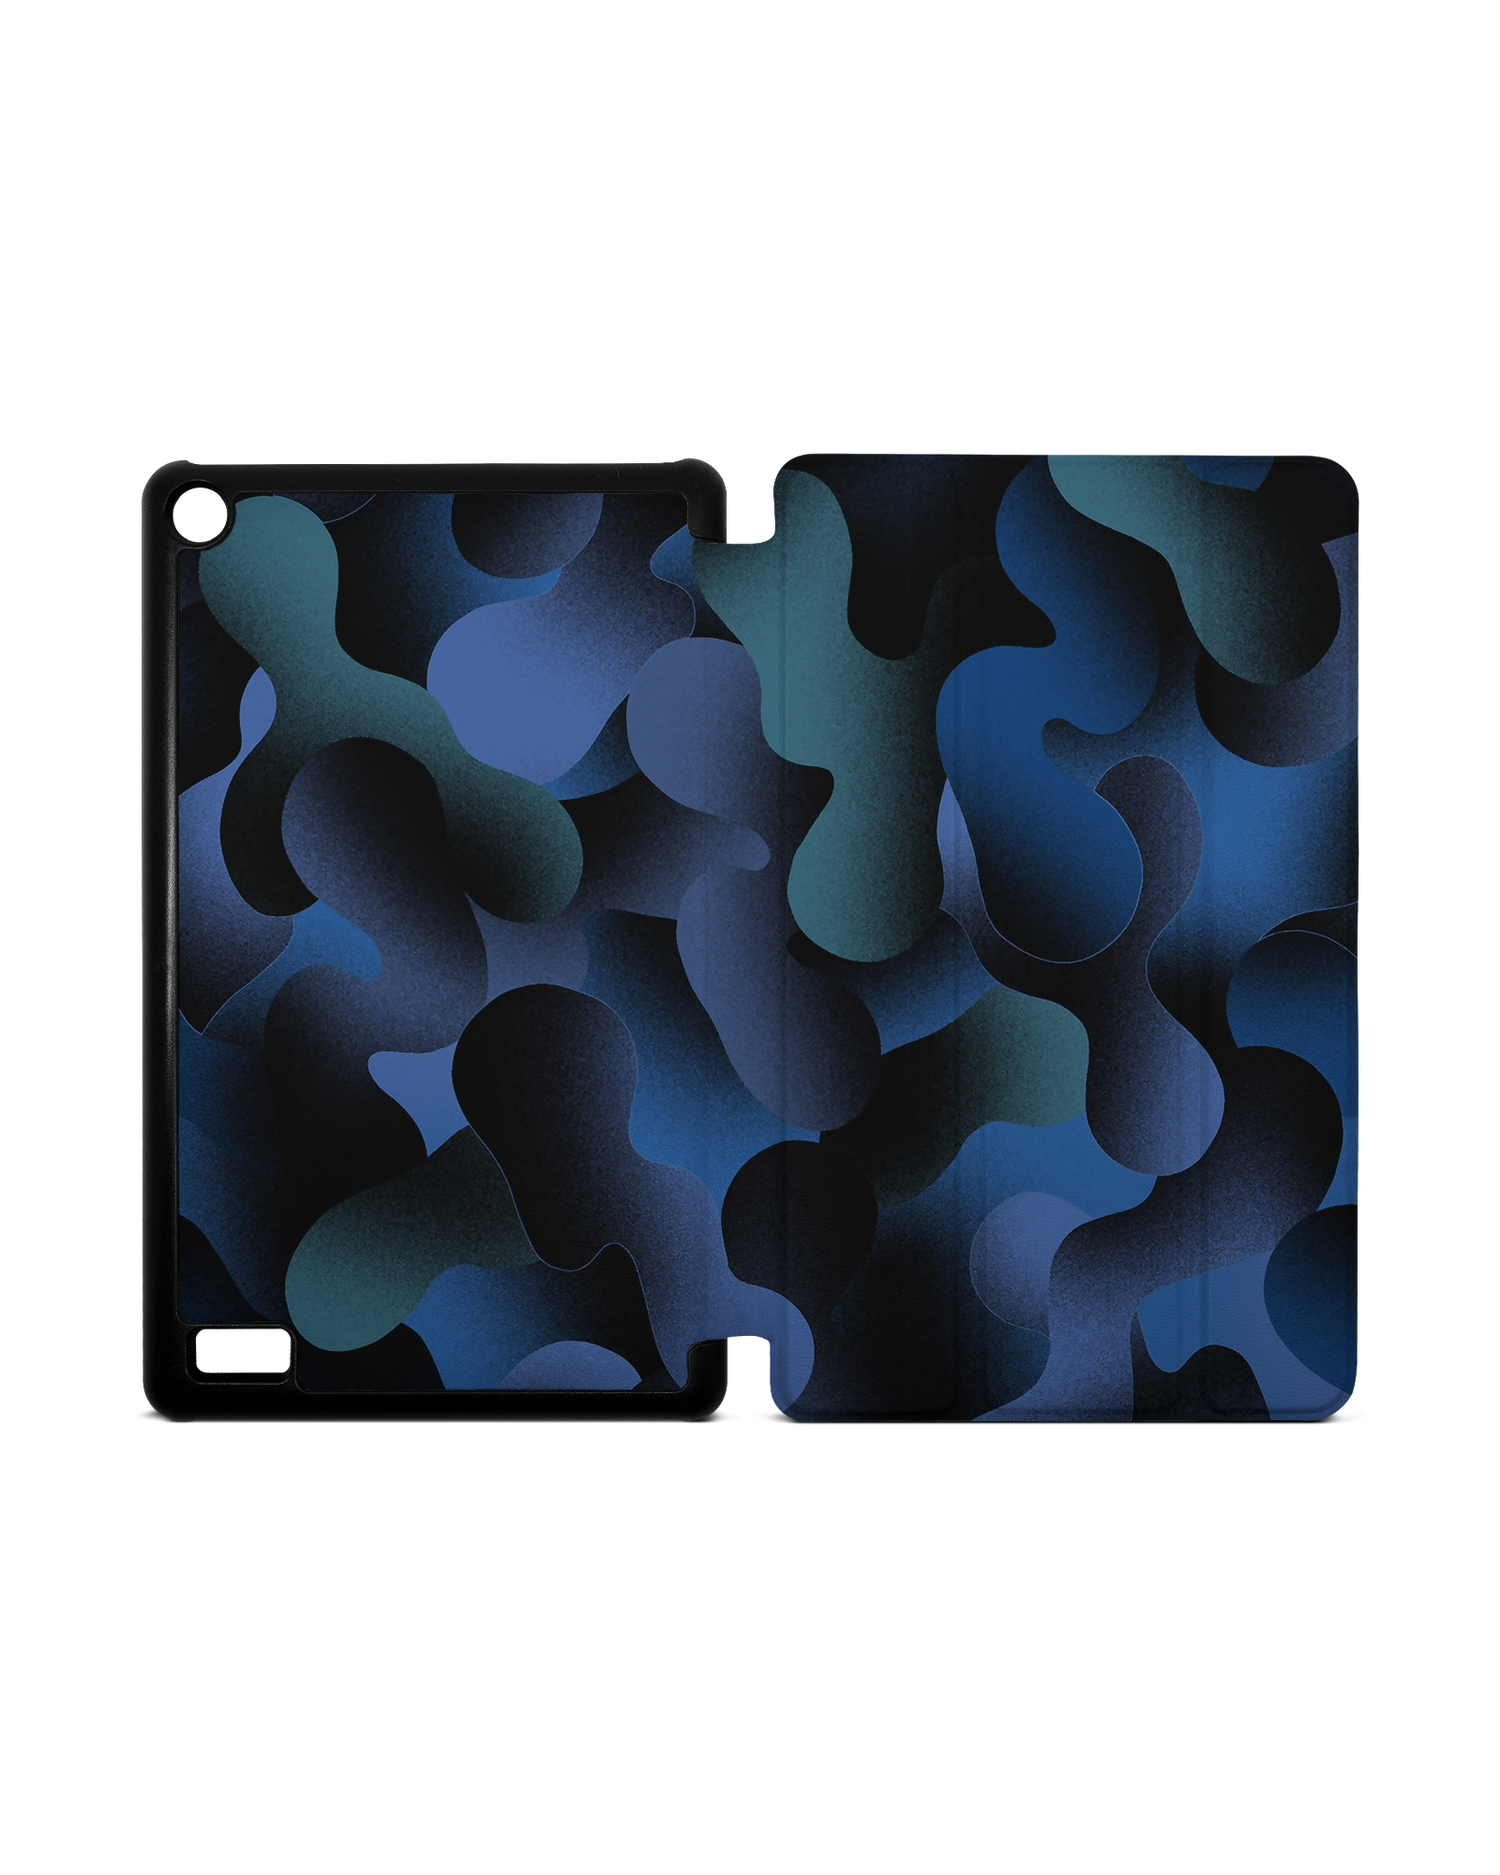 Night Moves Tablet Smart Case for Amazon Fire 7: Opened